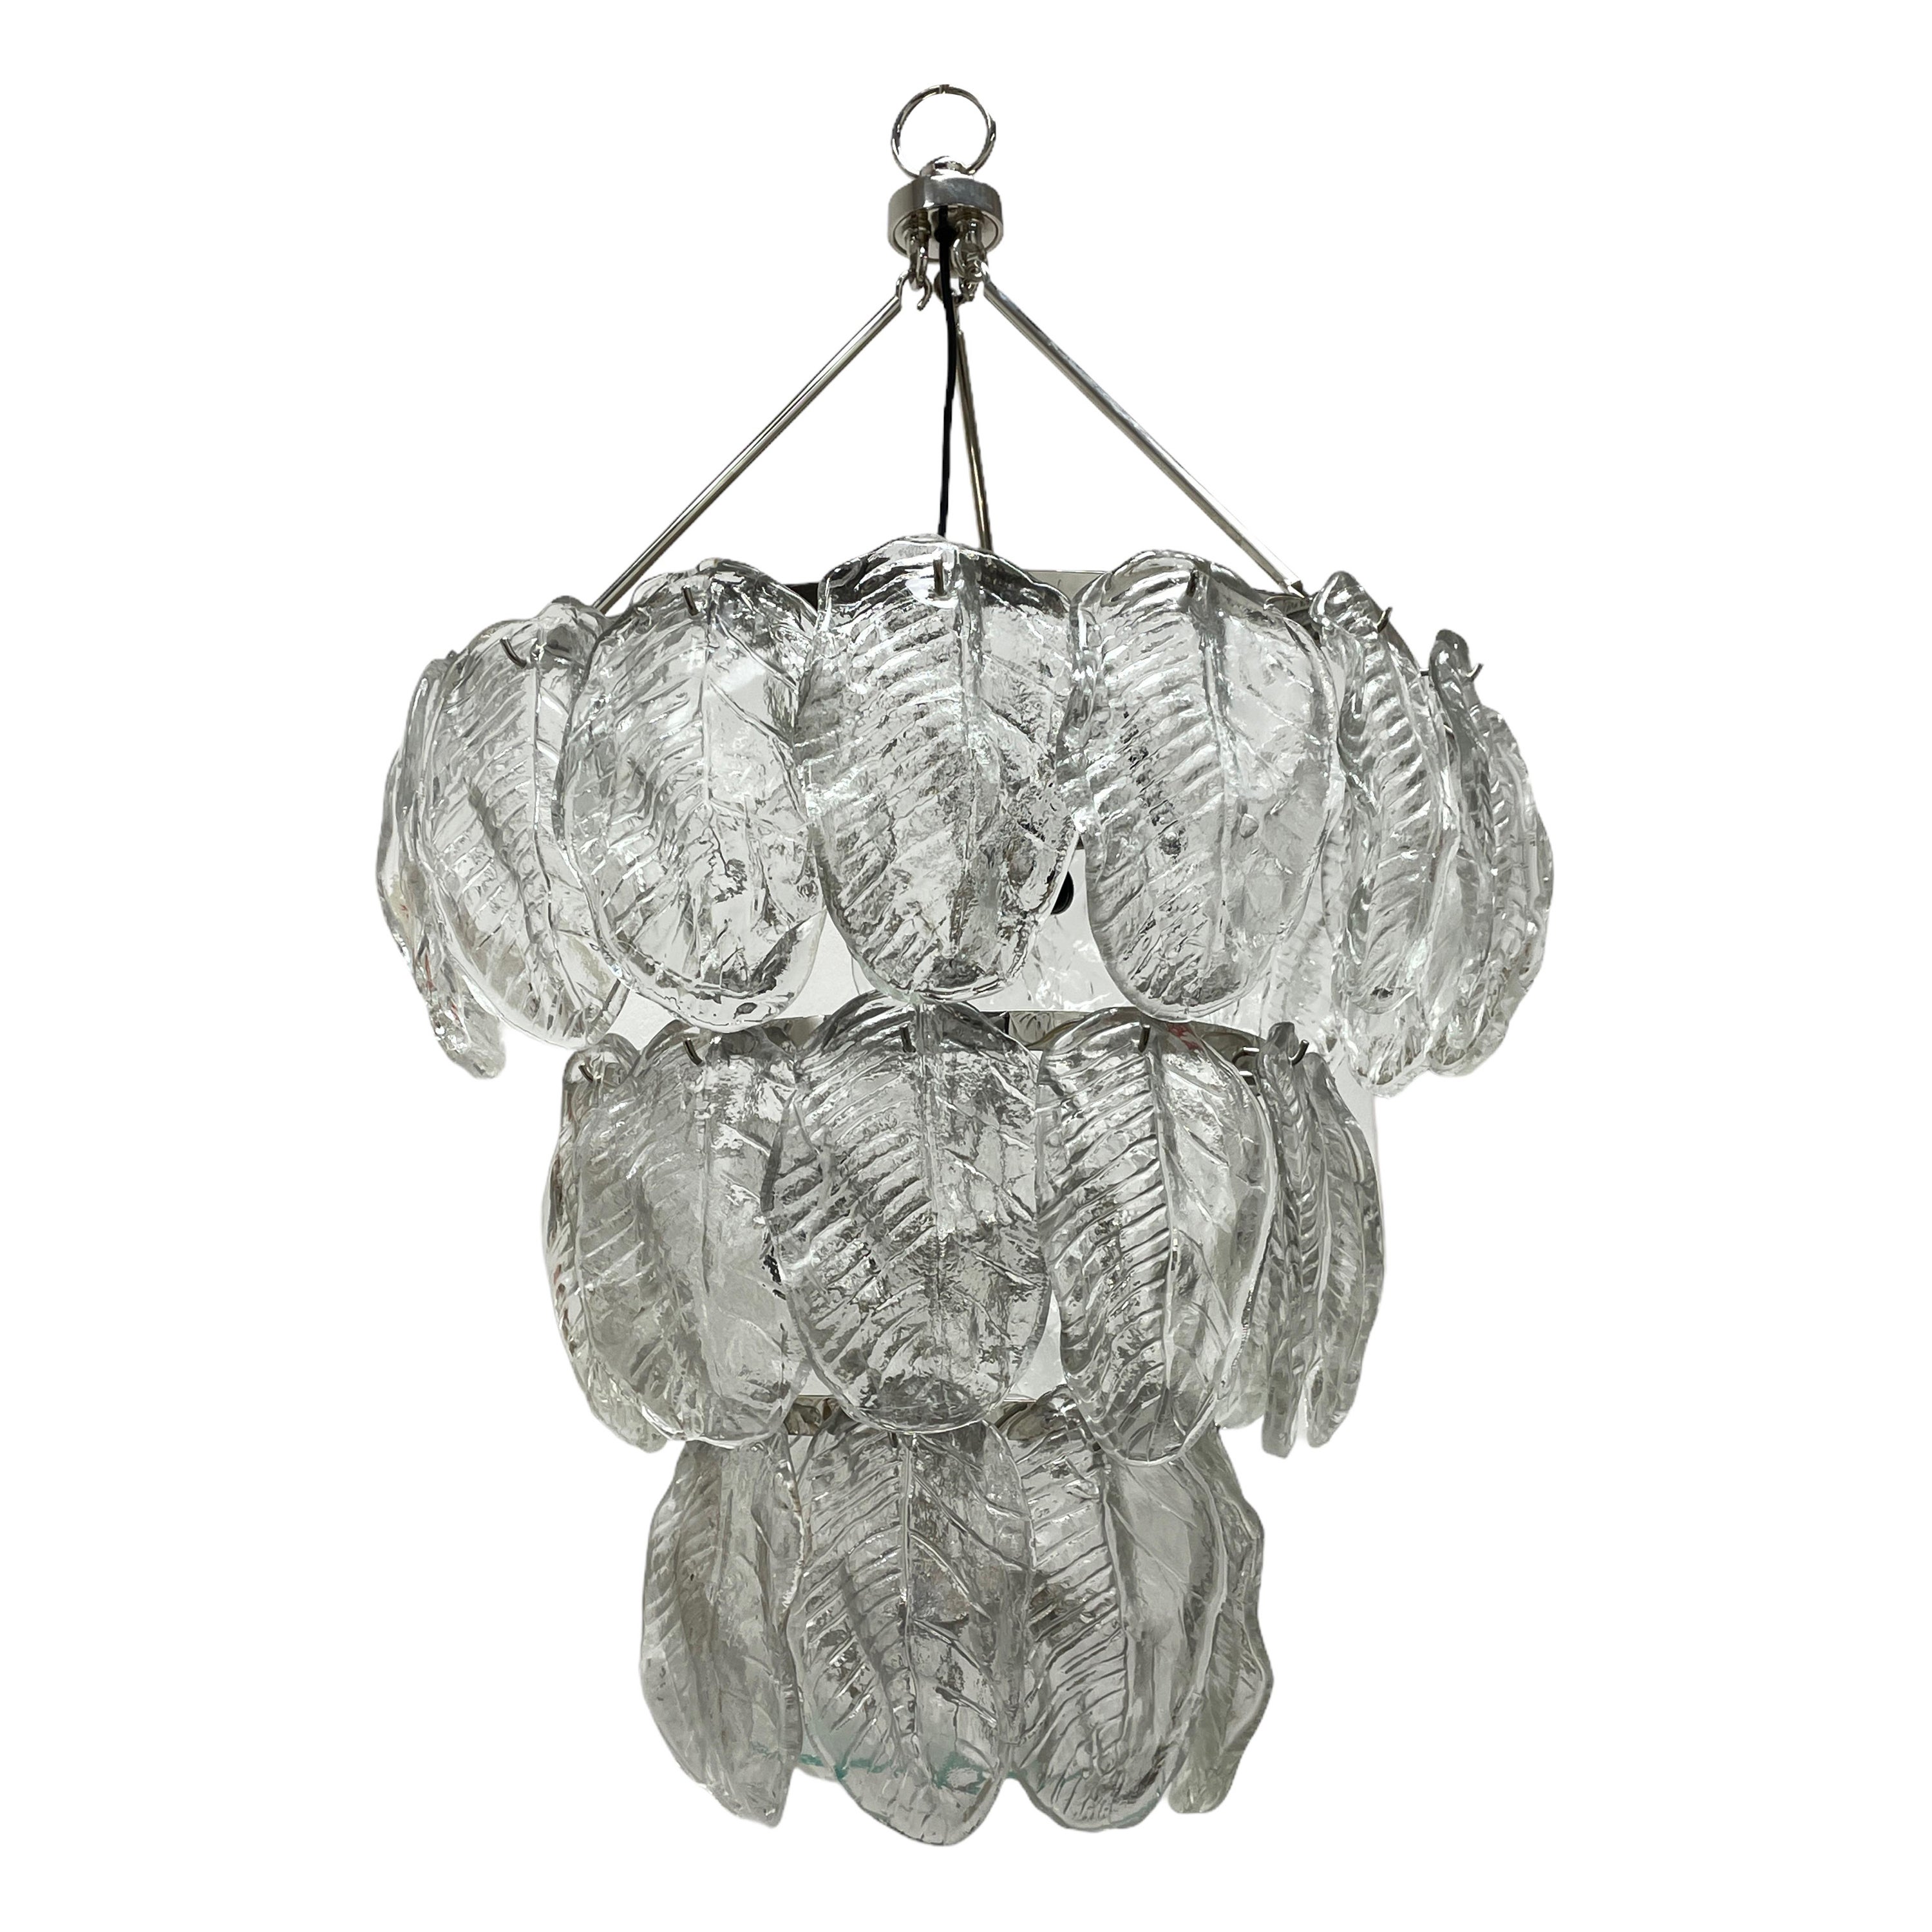 Monumental Large Clear Murano Glass Leaf & Chrome Venini Chandelier Italy, 1980s For Sale